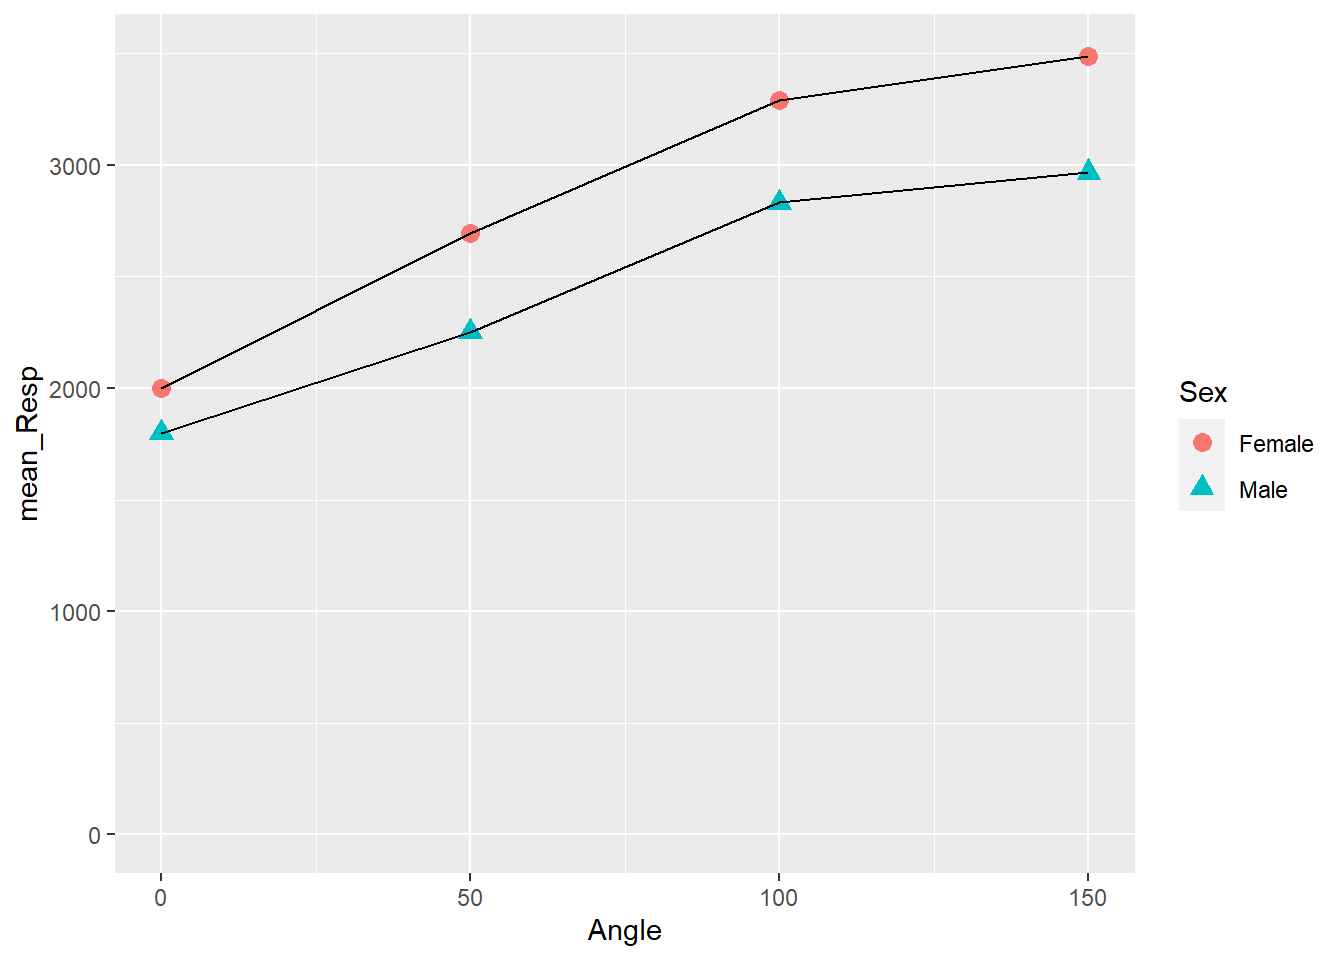 Changing Shape and Size of Data Points